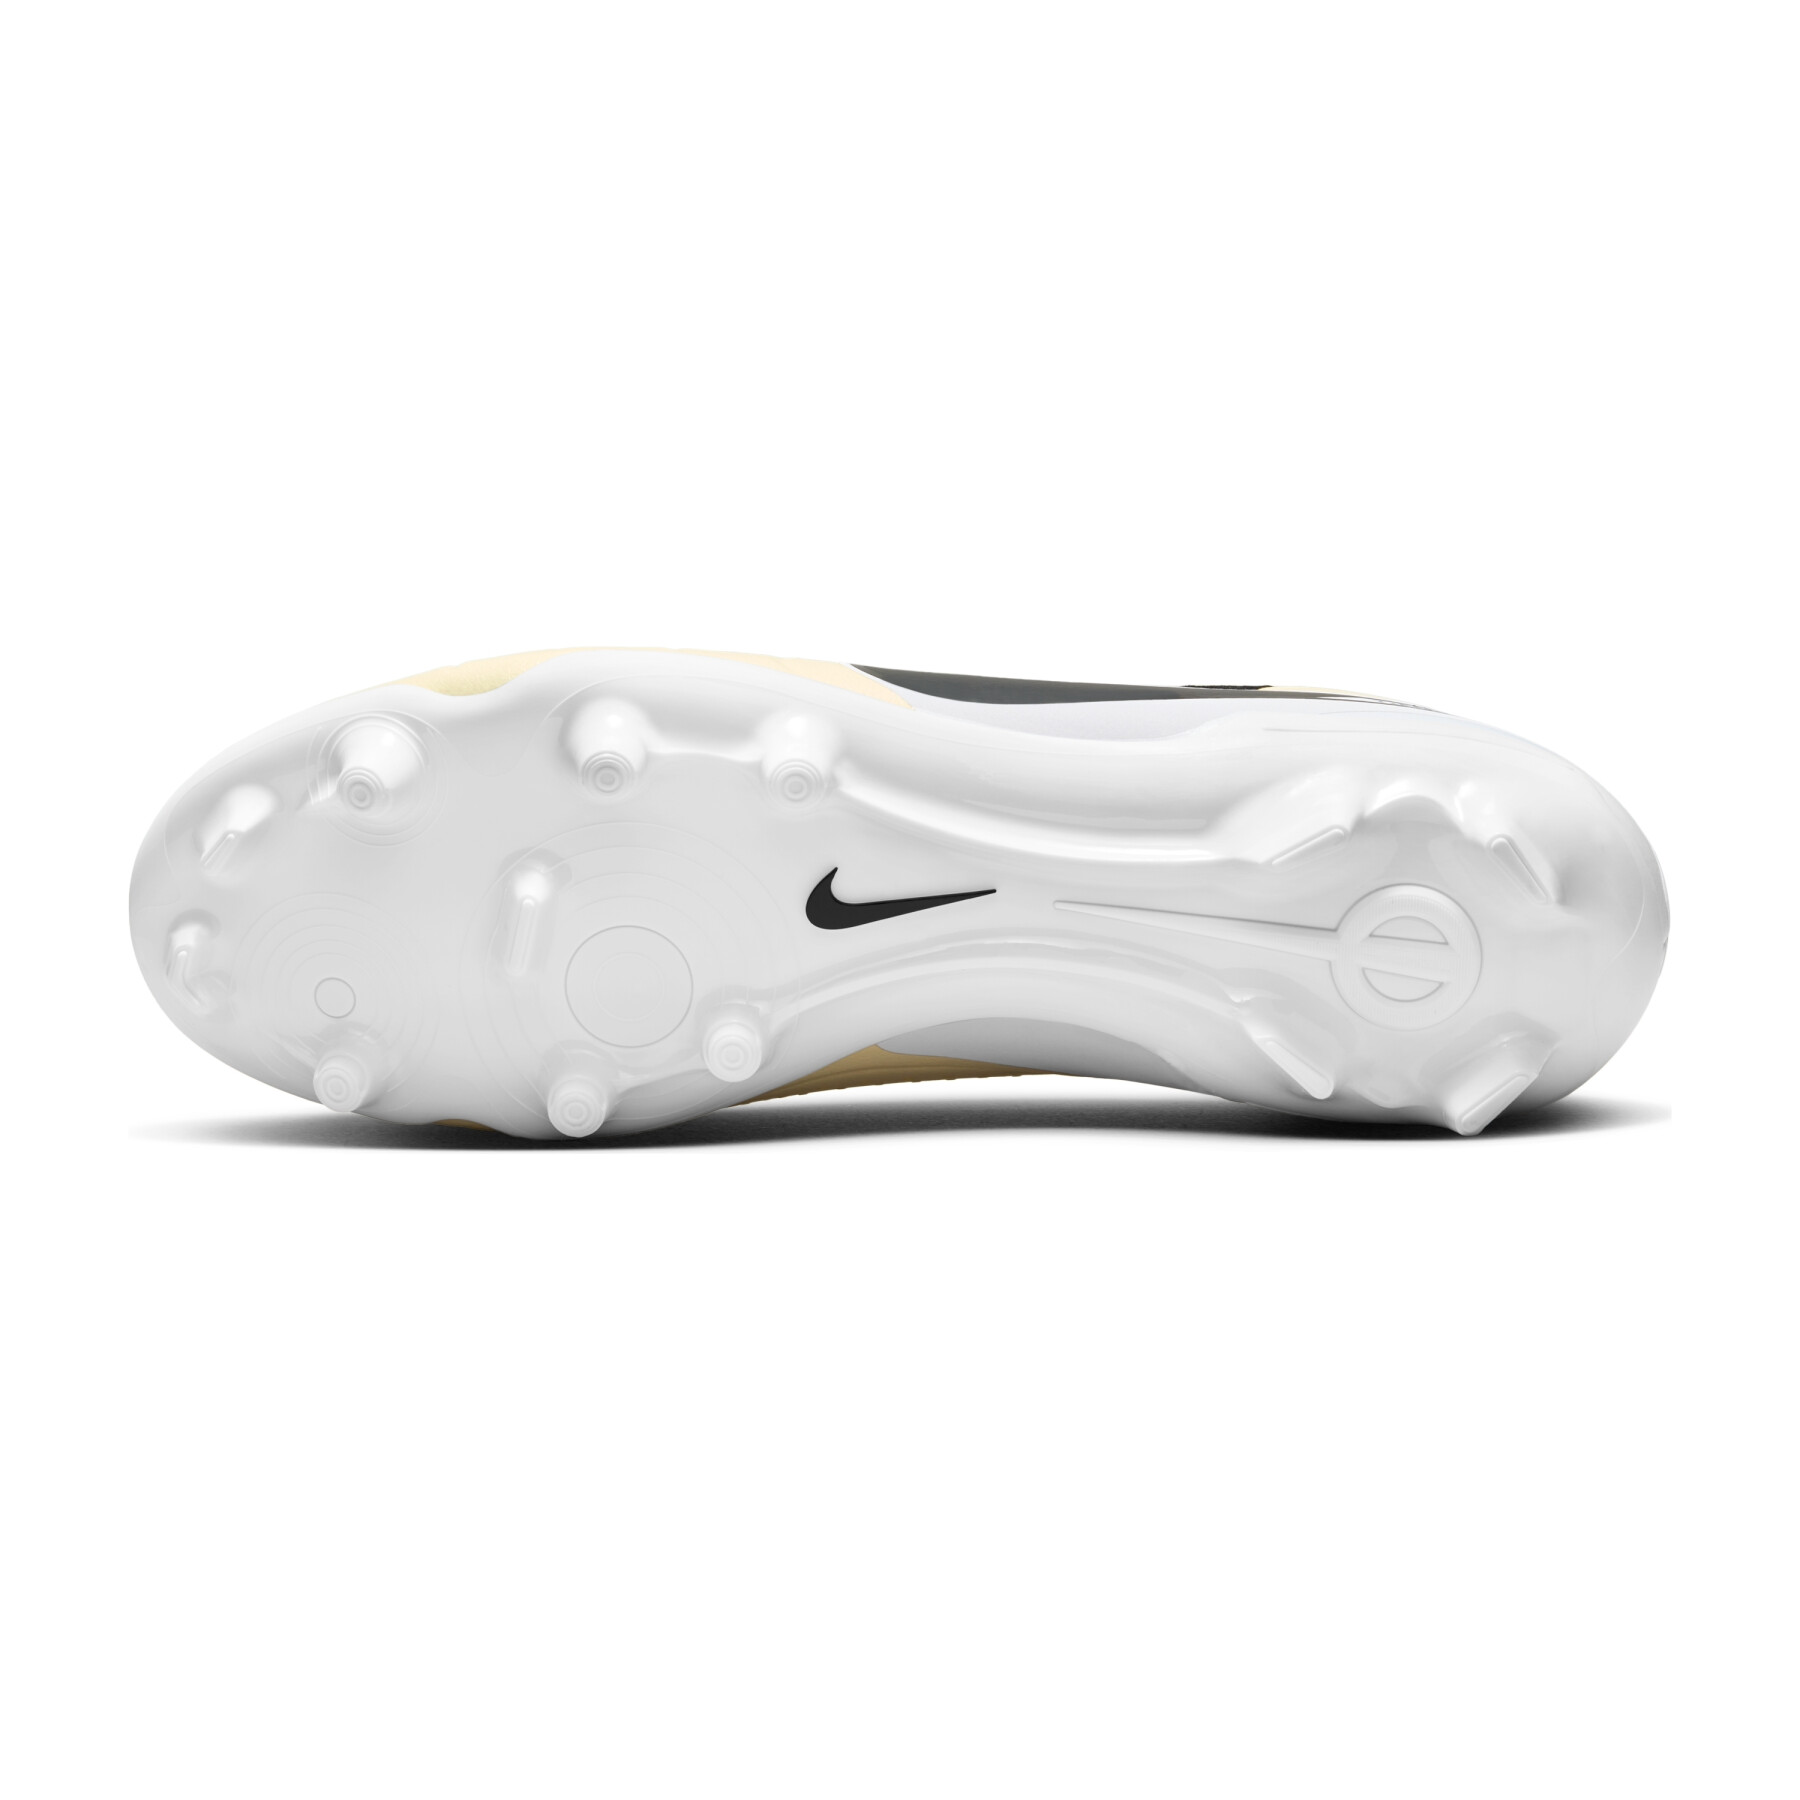 Soccer shoes Nike Tiempo Legend 10 Academy MG